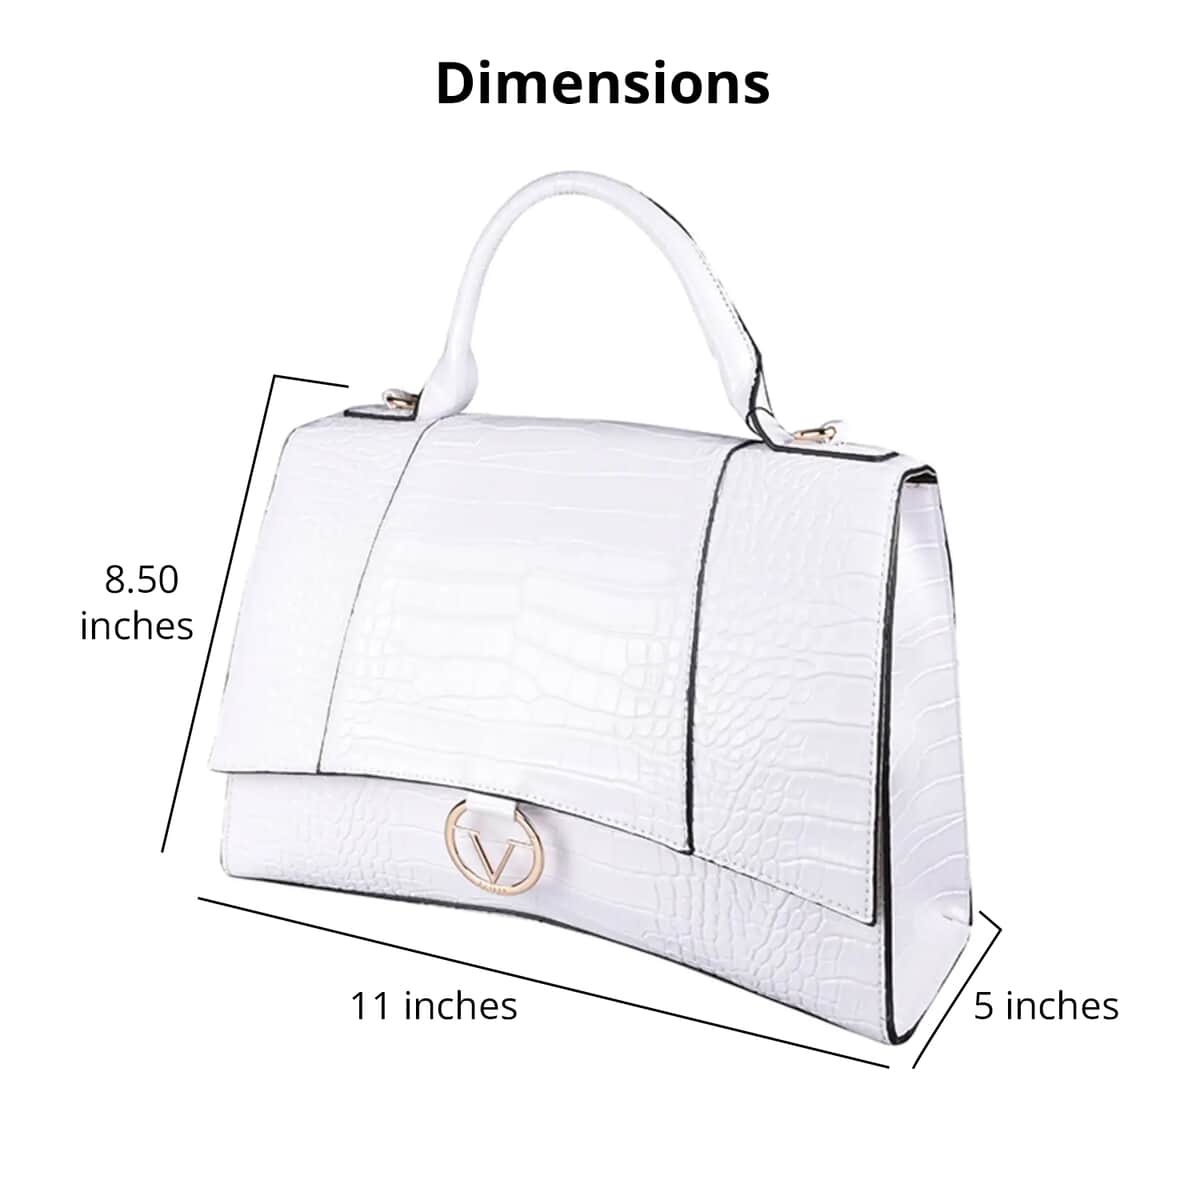 19V69 ITALIA by Alessandro Versace Crocodile Embossed Faux Leather Satchel Bag with Metallic Clasp Closure - White | Cute Satchel Bags | Satchel Messenger Bag | Faux Leather Tote Bags | Women's Utility Bag image number 3